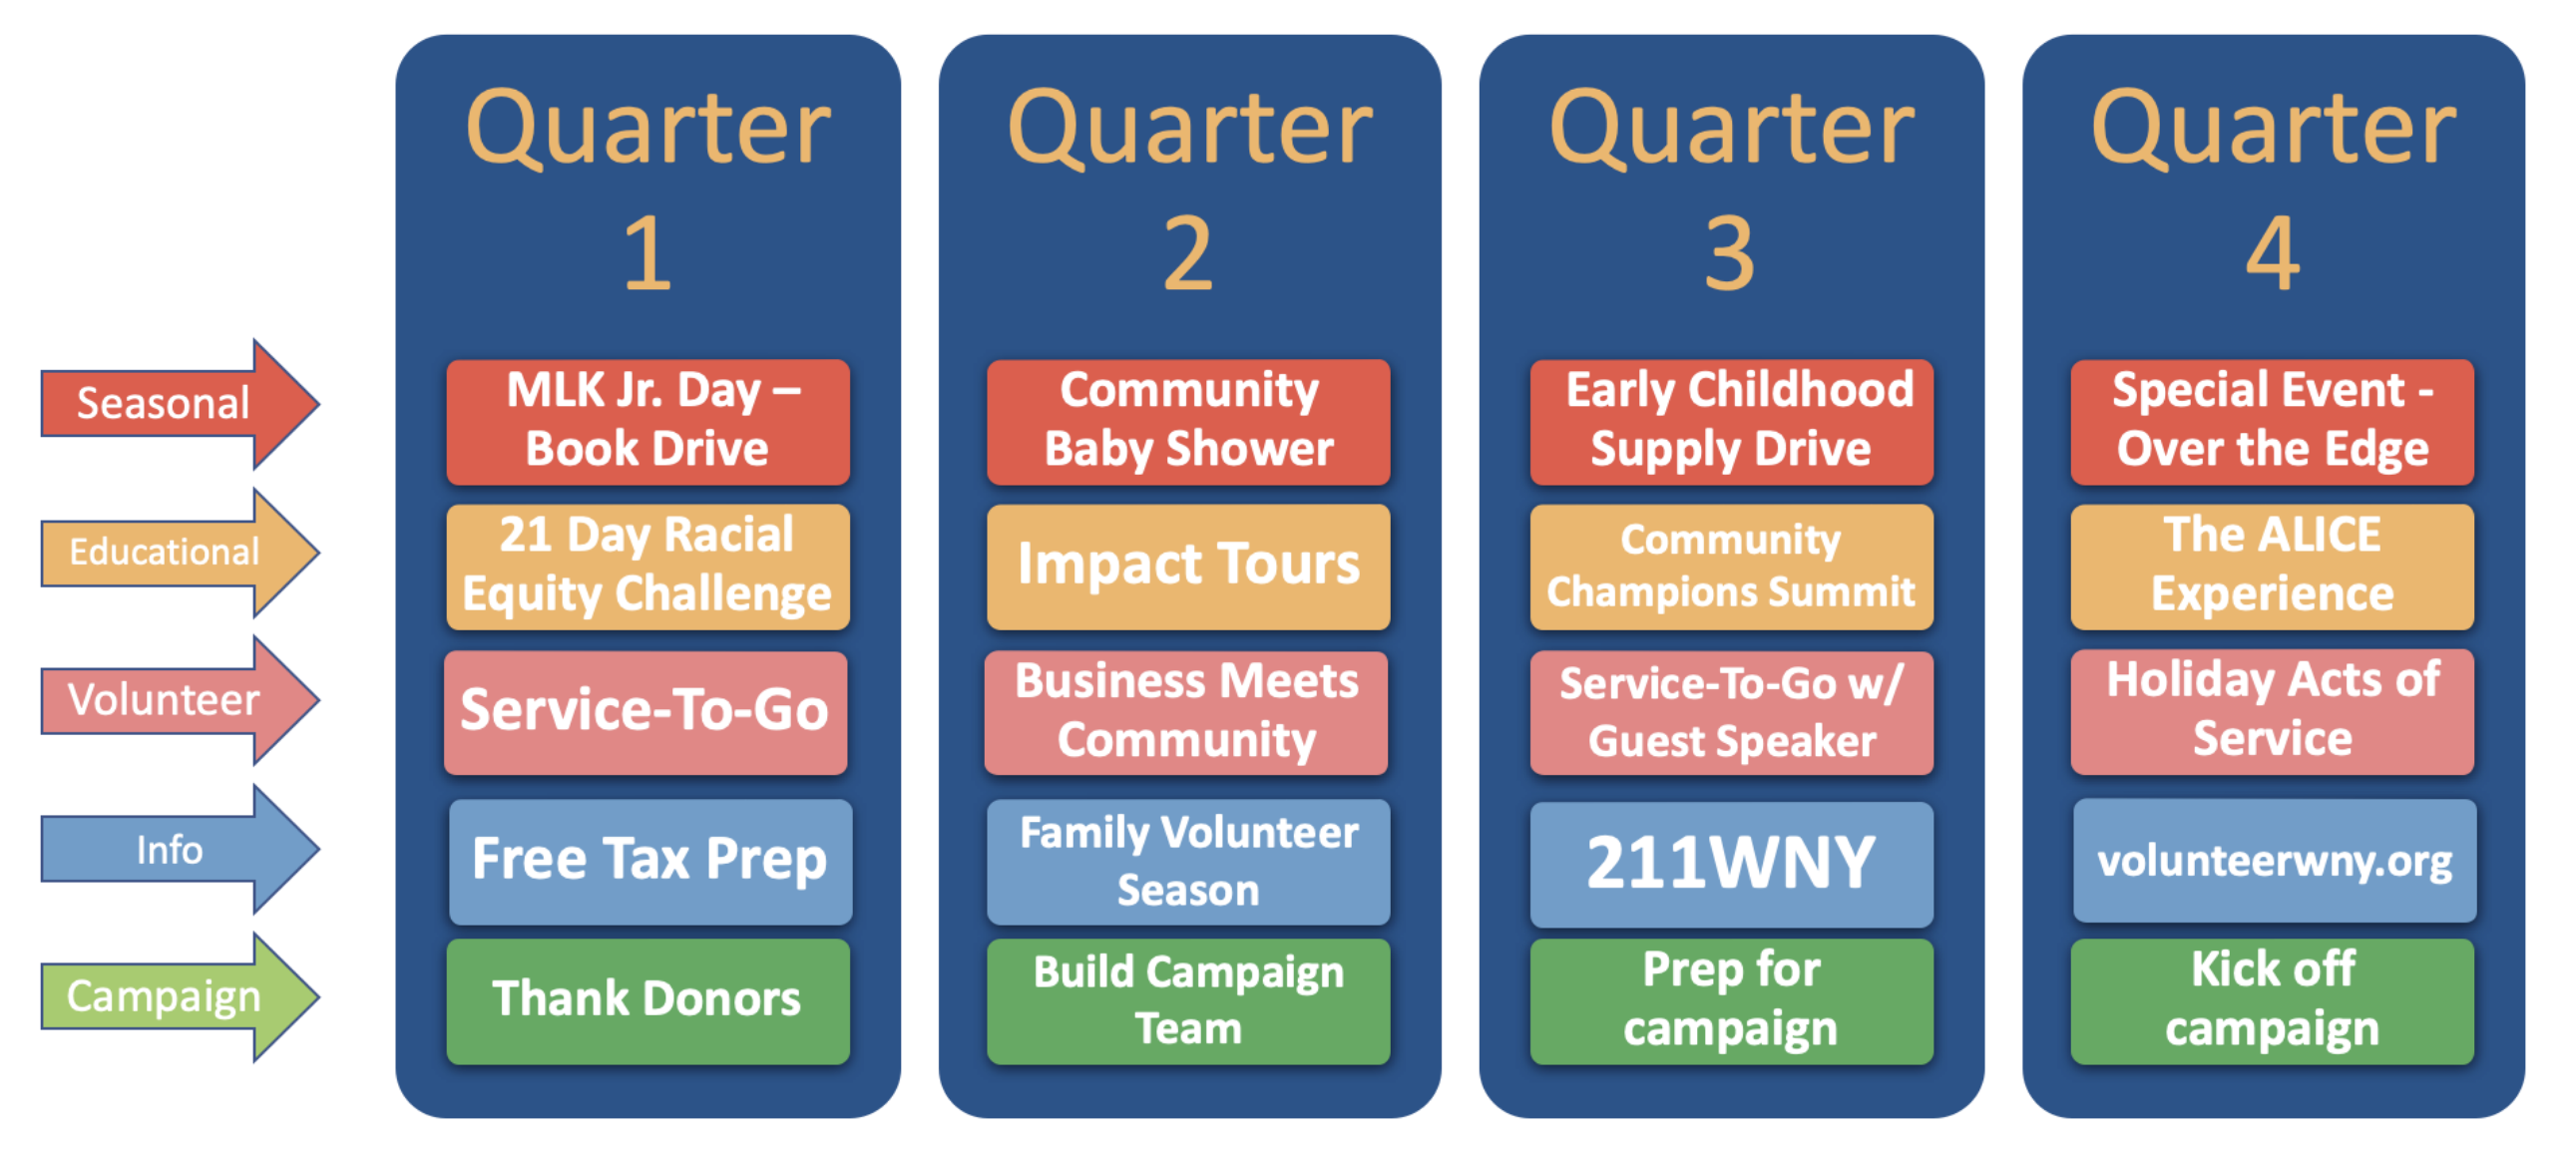 Quarters for the Engagement Programs